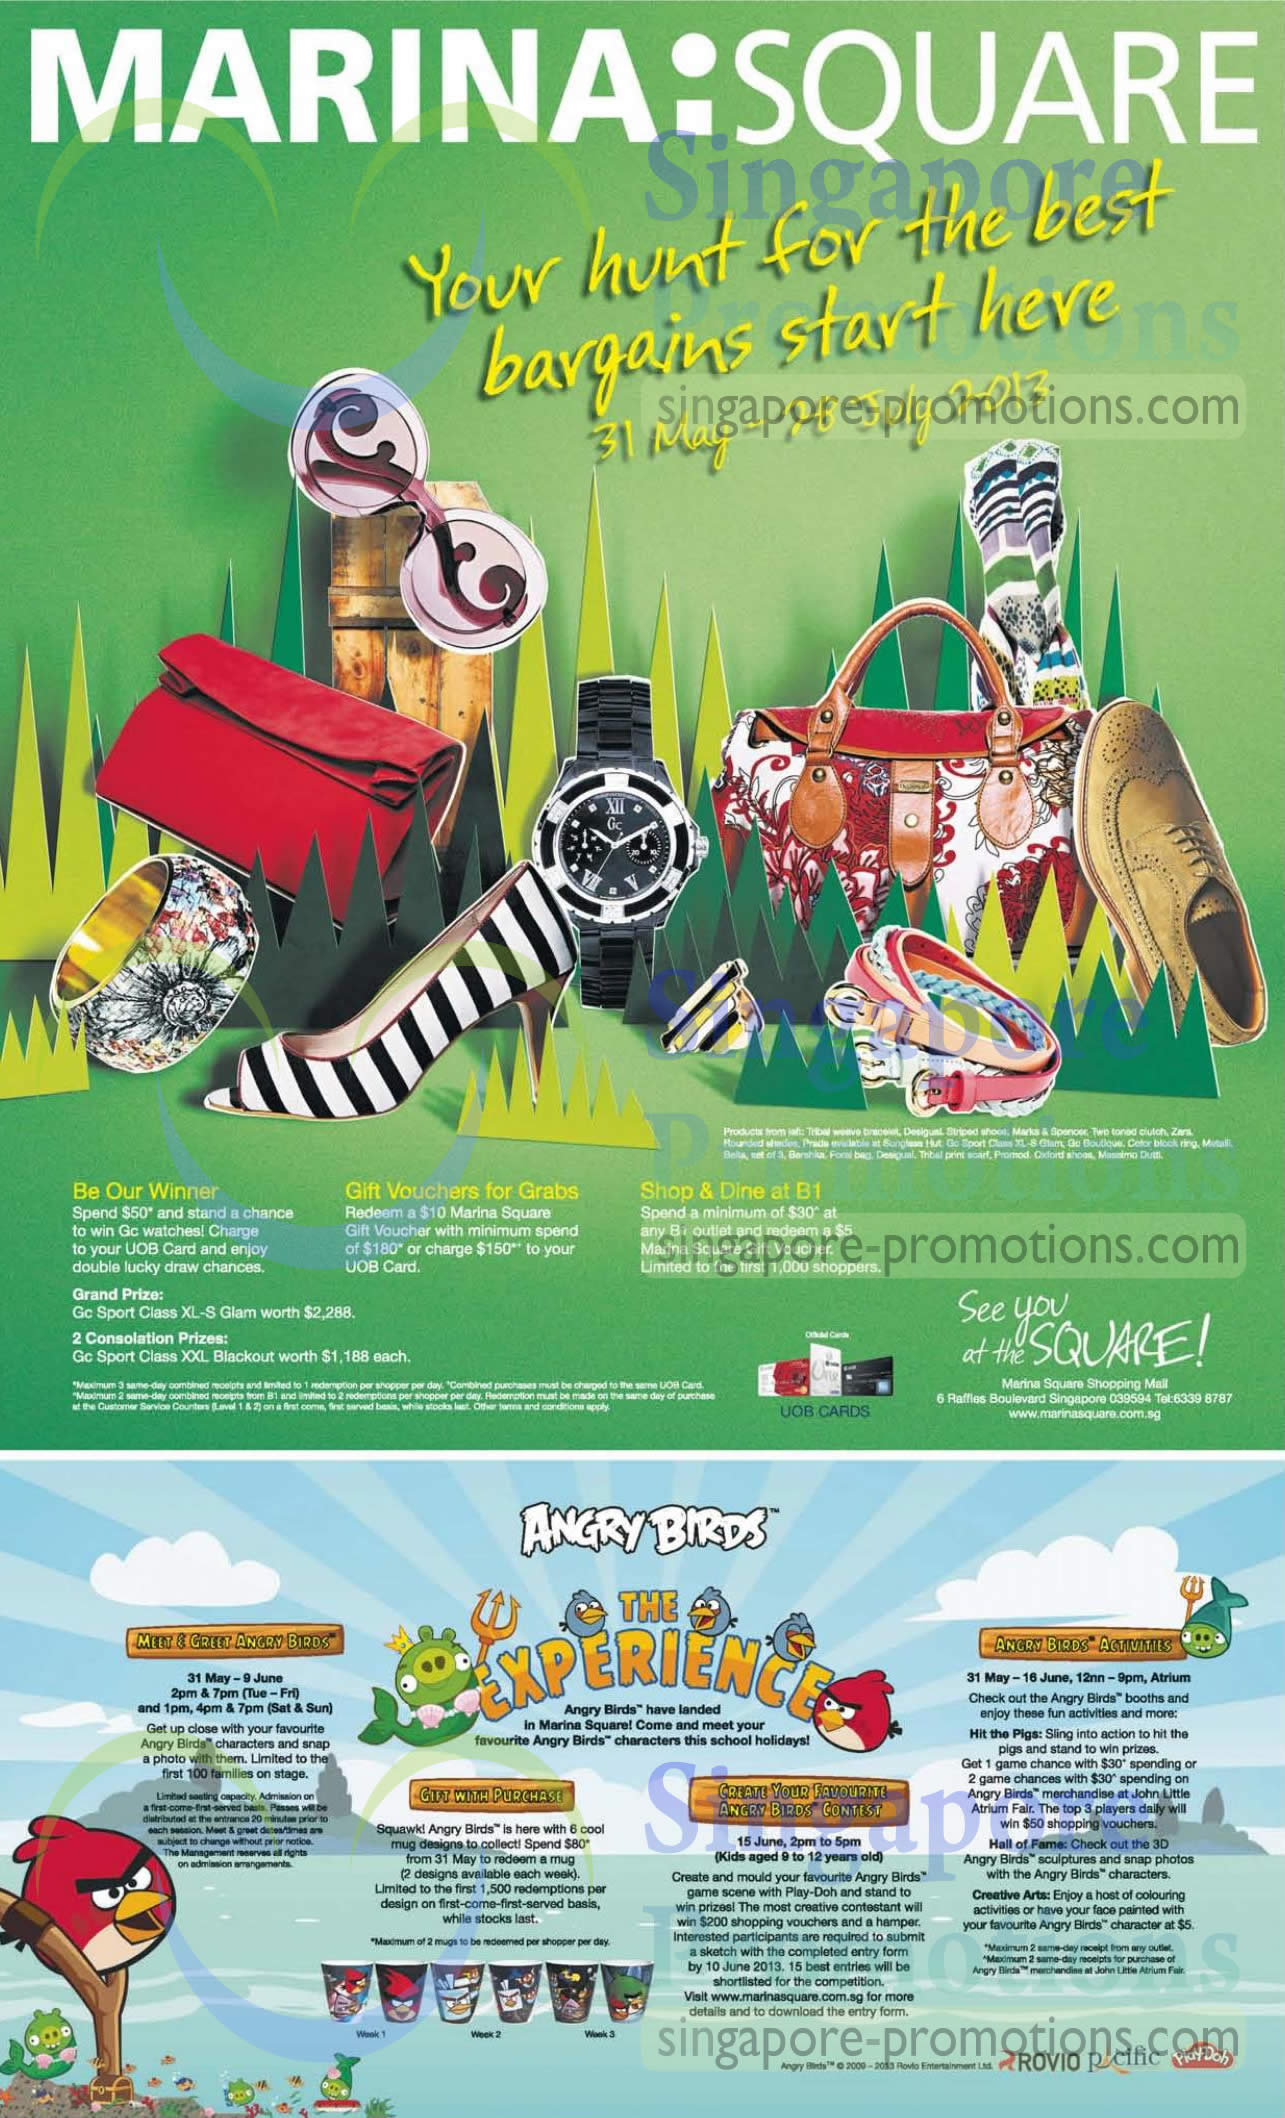 Featured image for Marina Square Hunt For Best Bargains & Angry Birds Promos & Activities 31 May - 28 Jul 2013